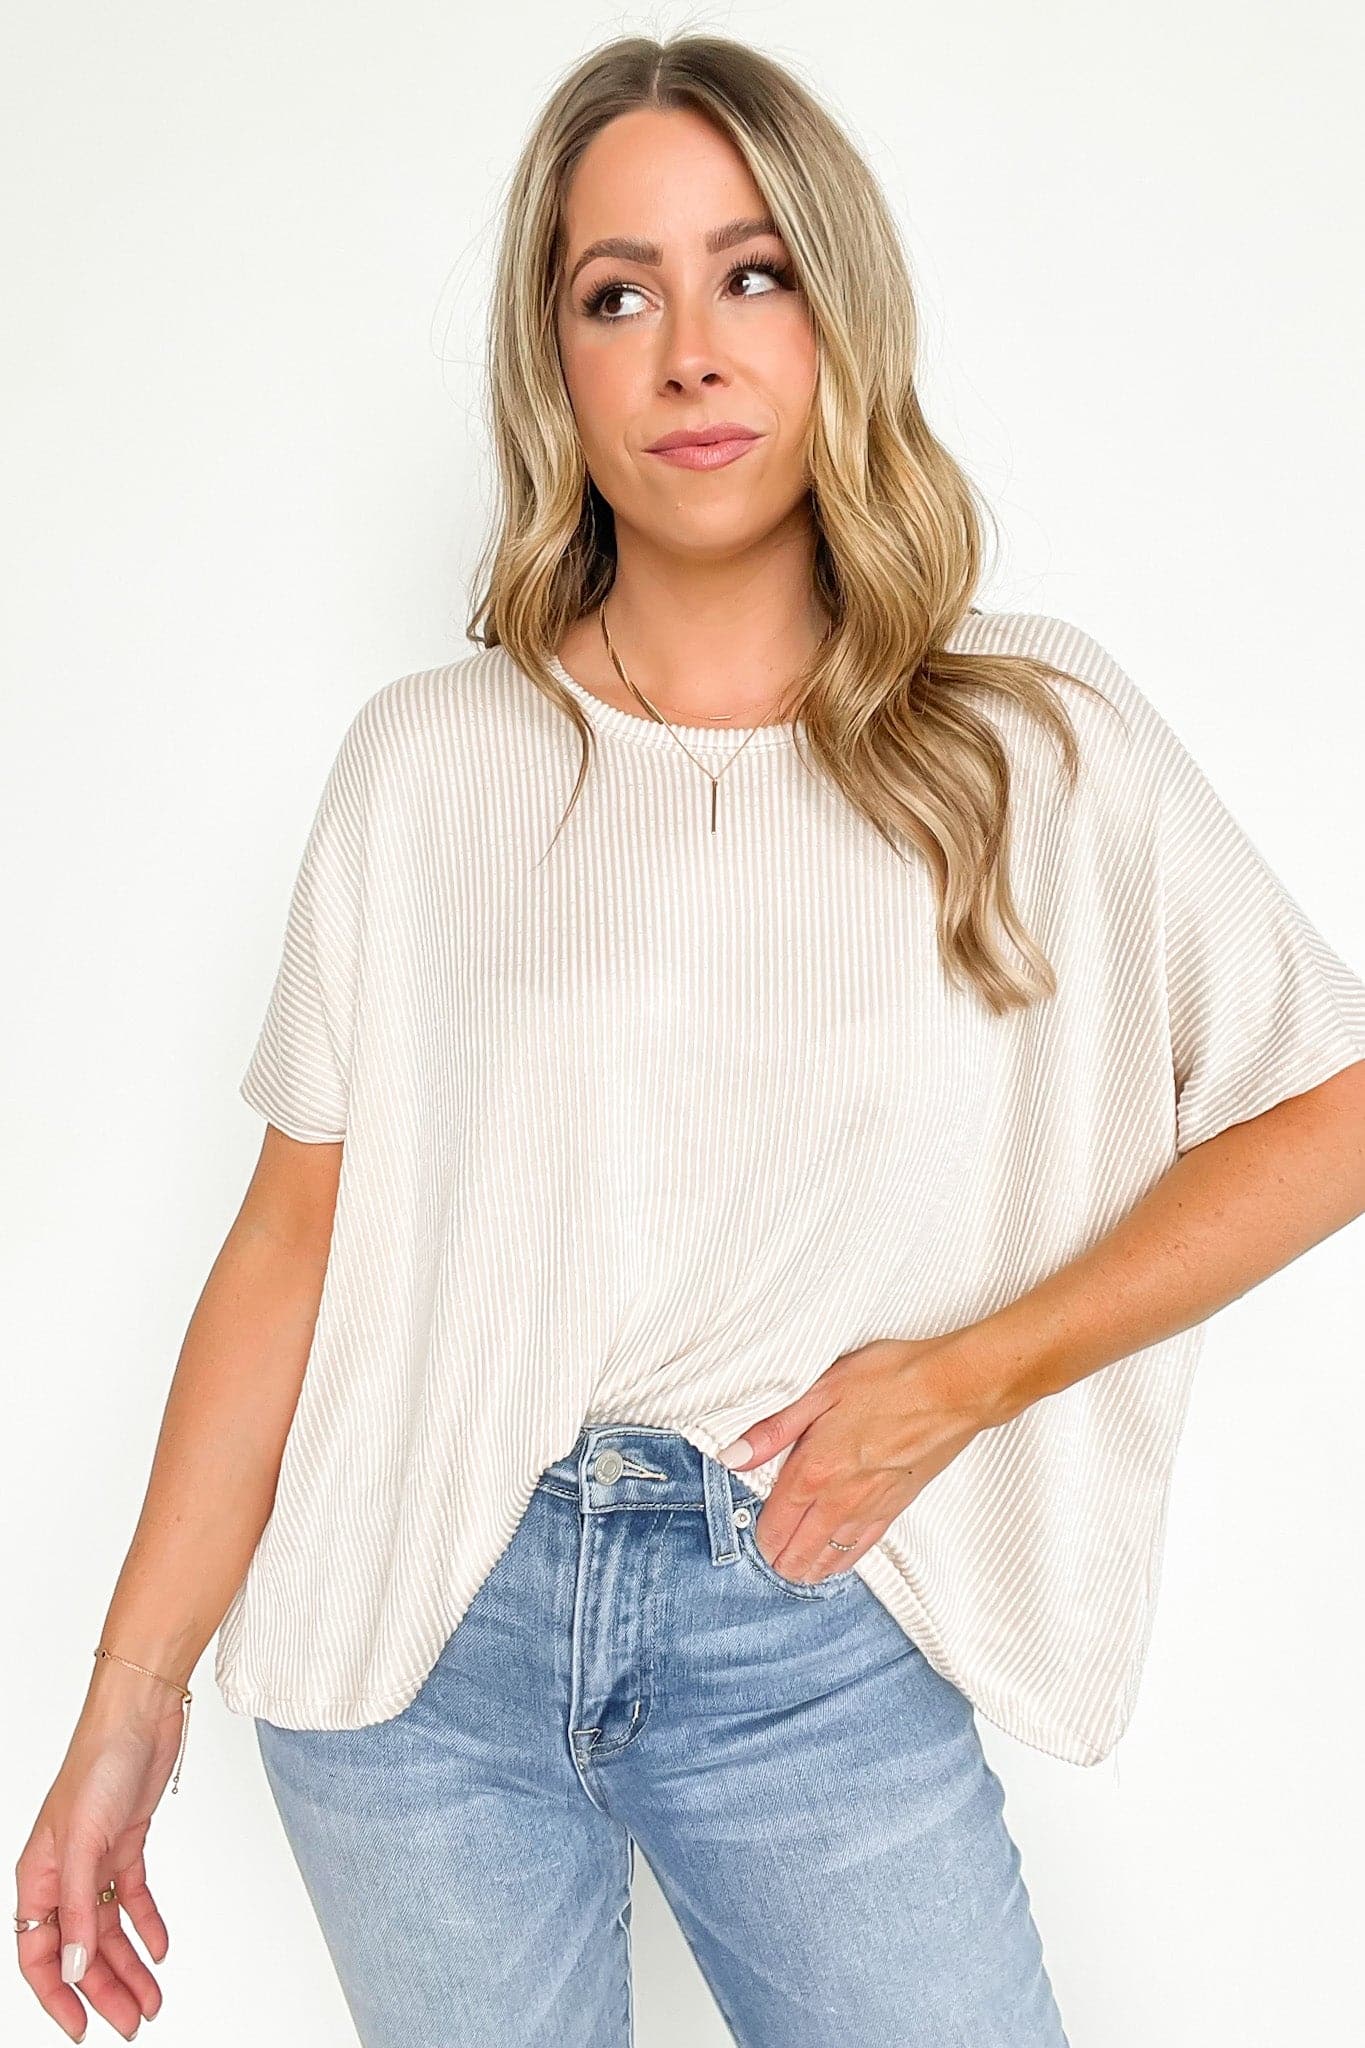 Beatryx Two Tone Rib Knit Oversized Top - BACK IN STOCK